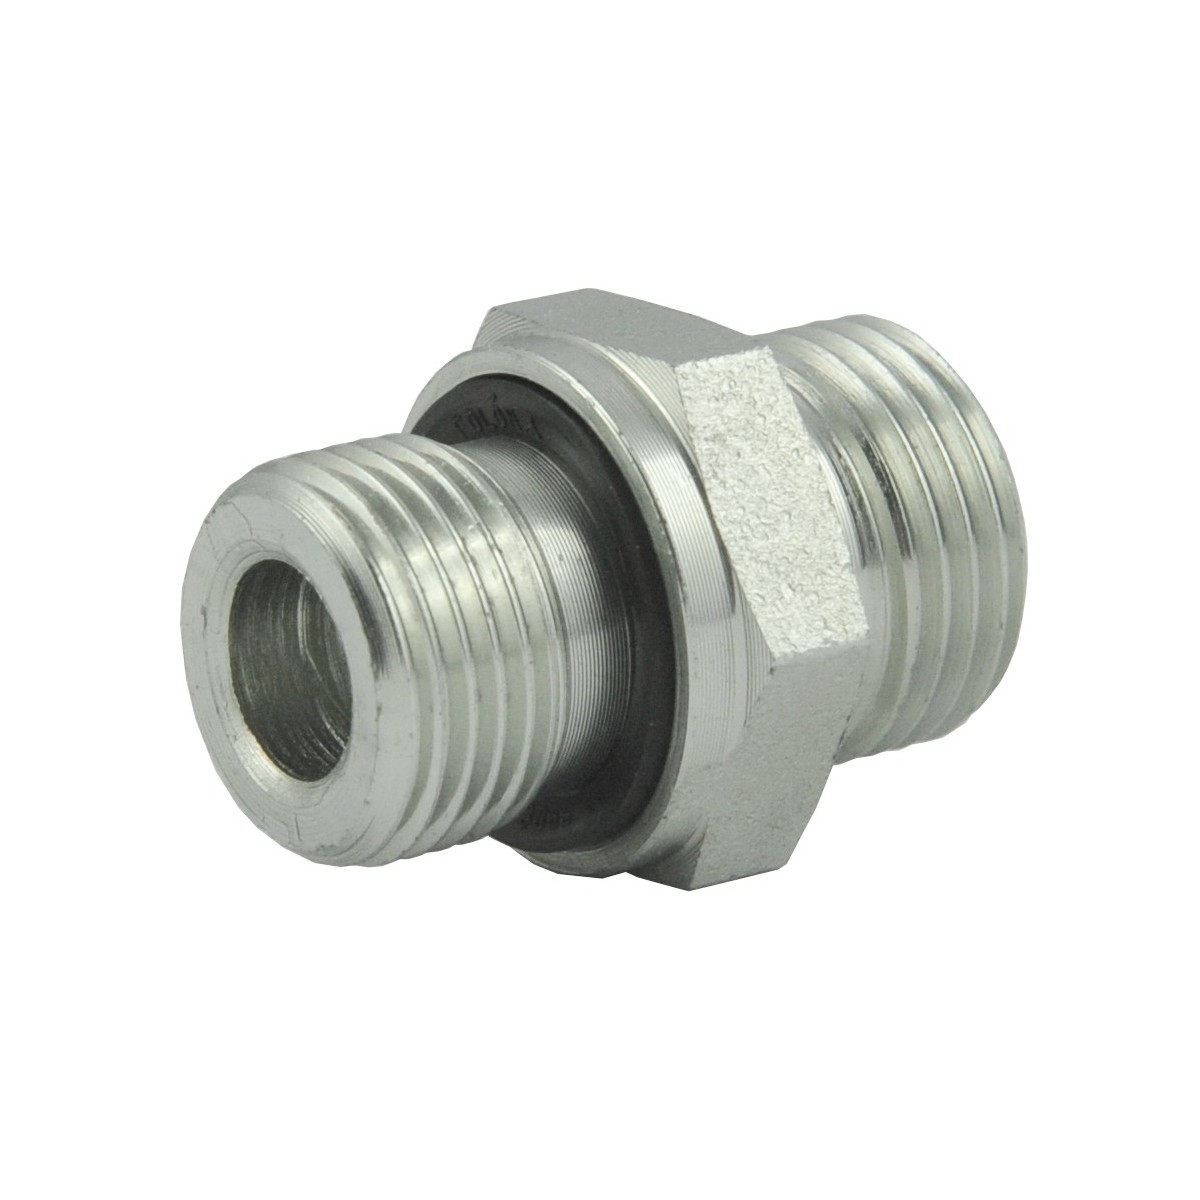 Nipple M18X1.5 3/8 Straight Coupling with a Gasket